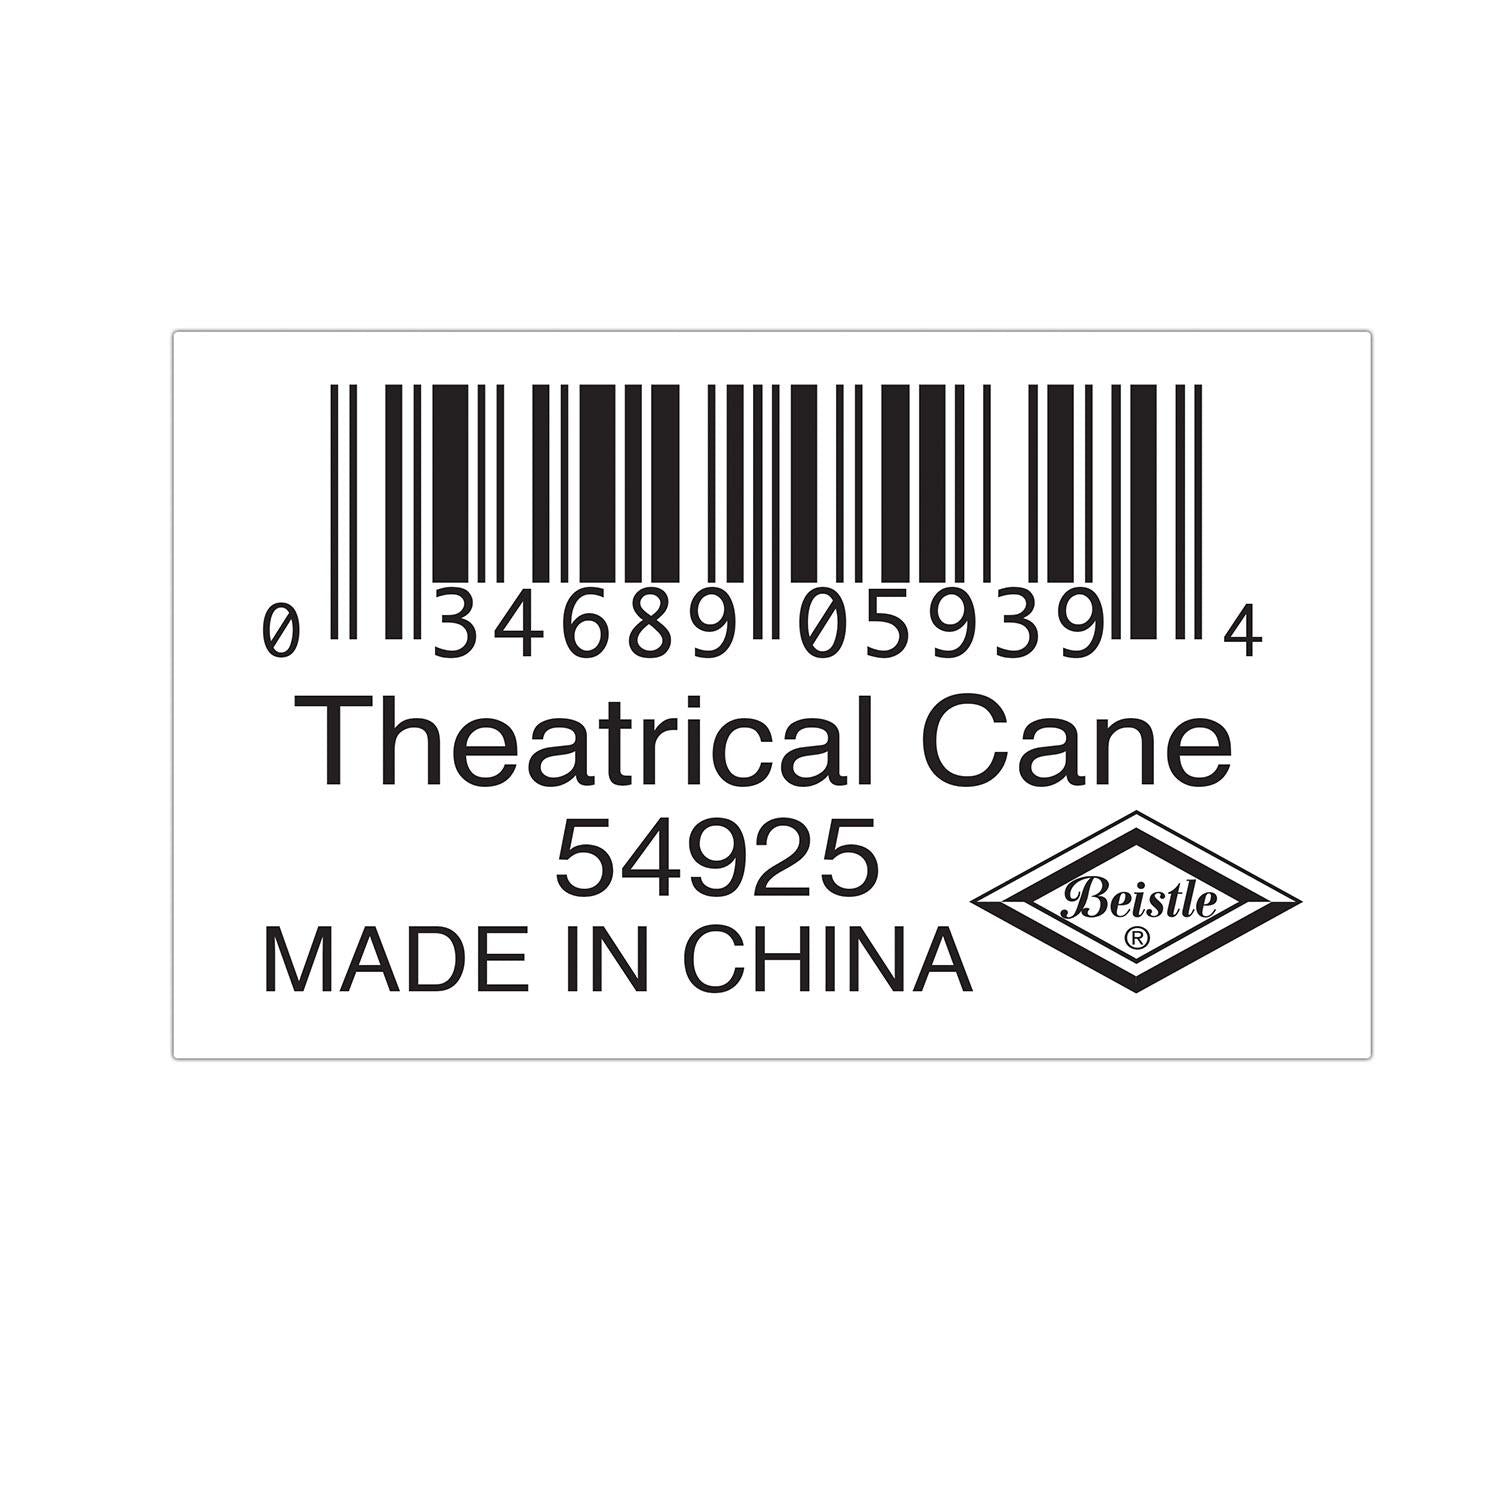 Theatrical Cane